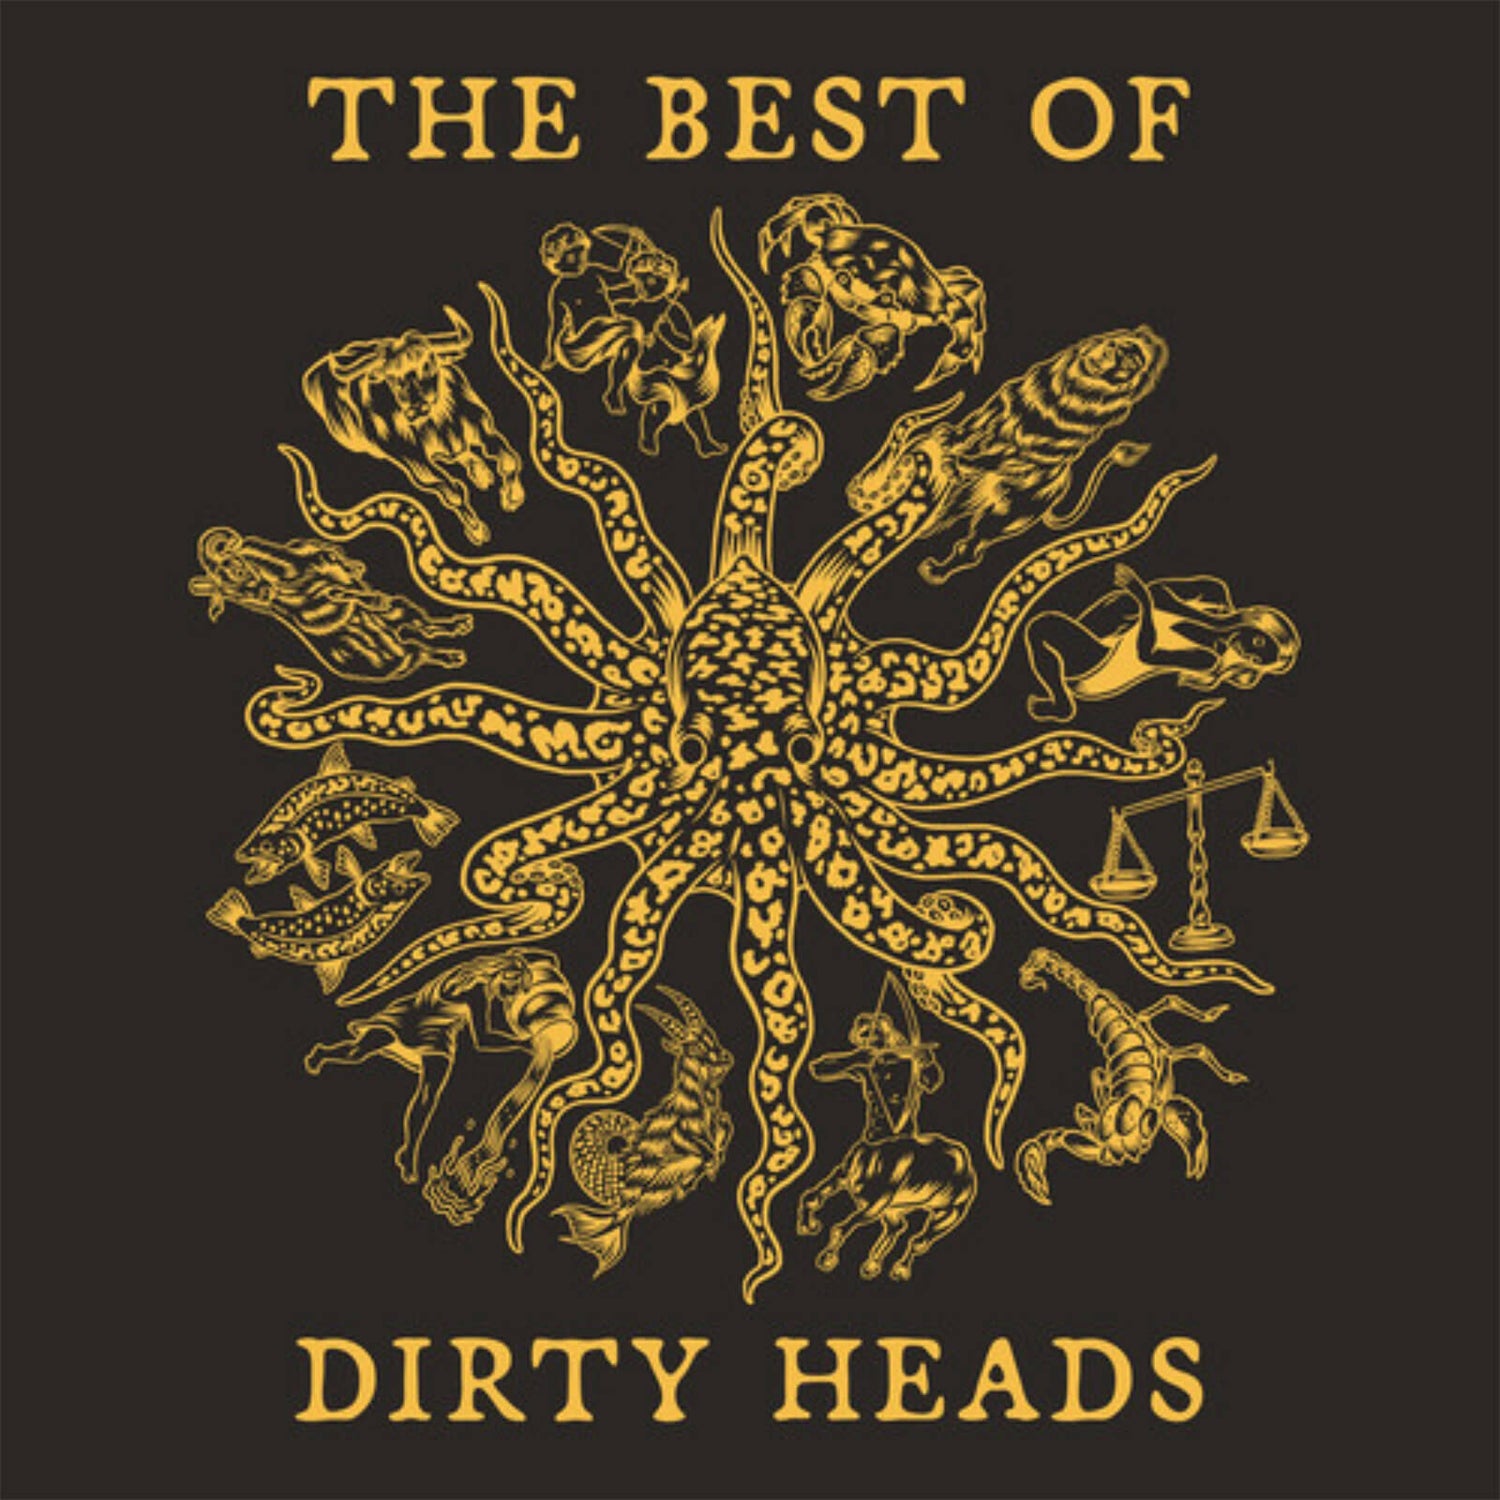 Dirty Heads - The Best Of Dirty Heads Vinyl 2LP (Coloured)